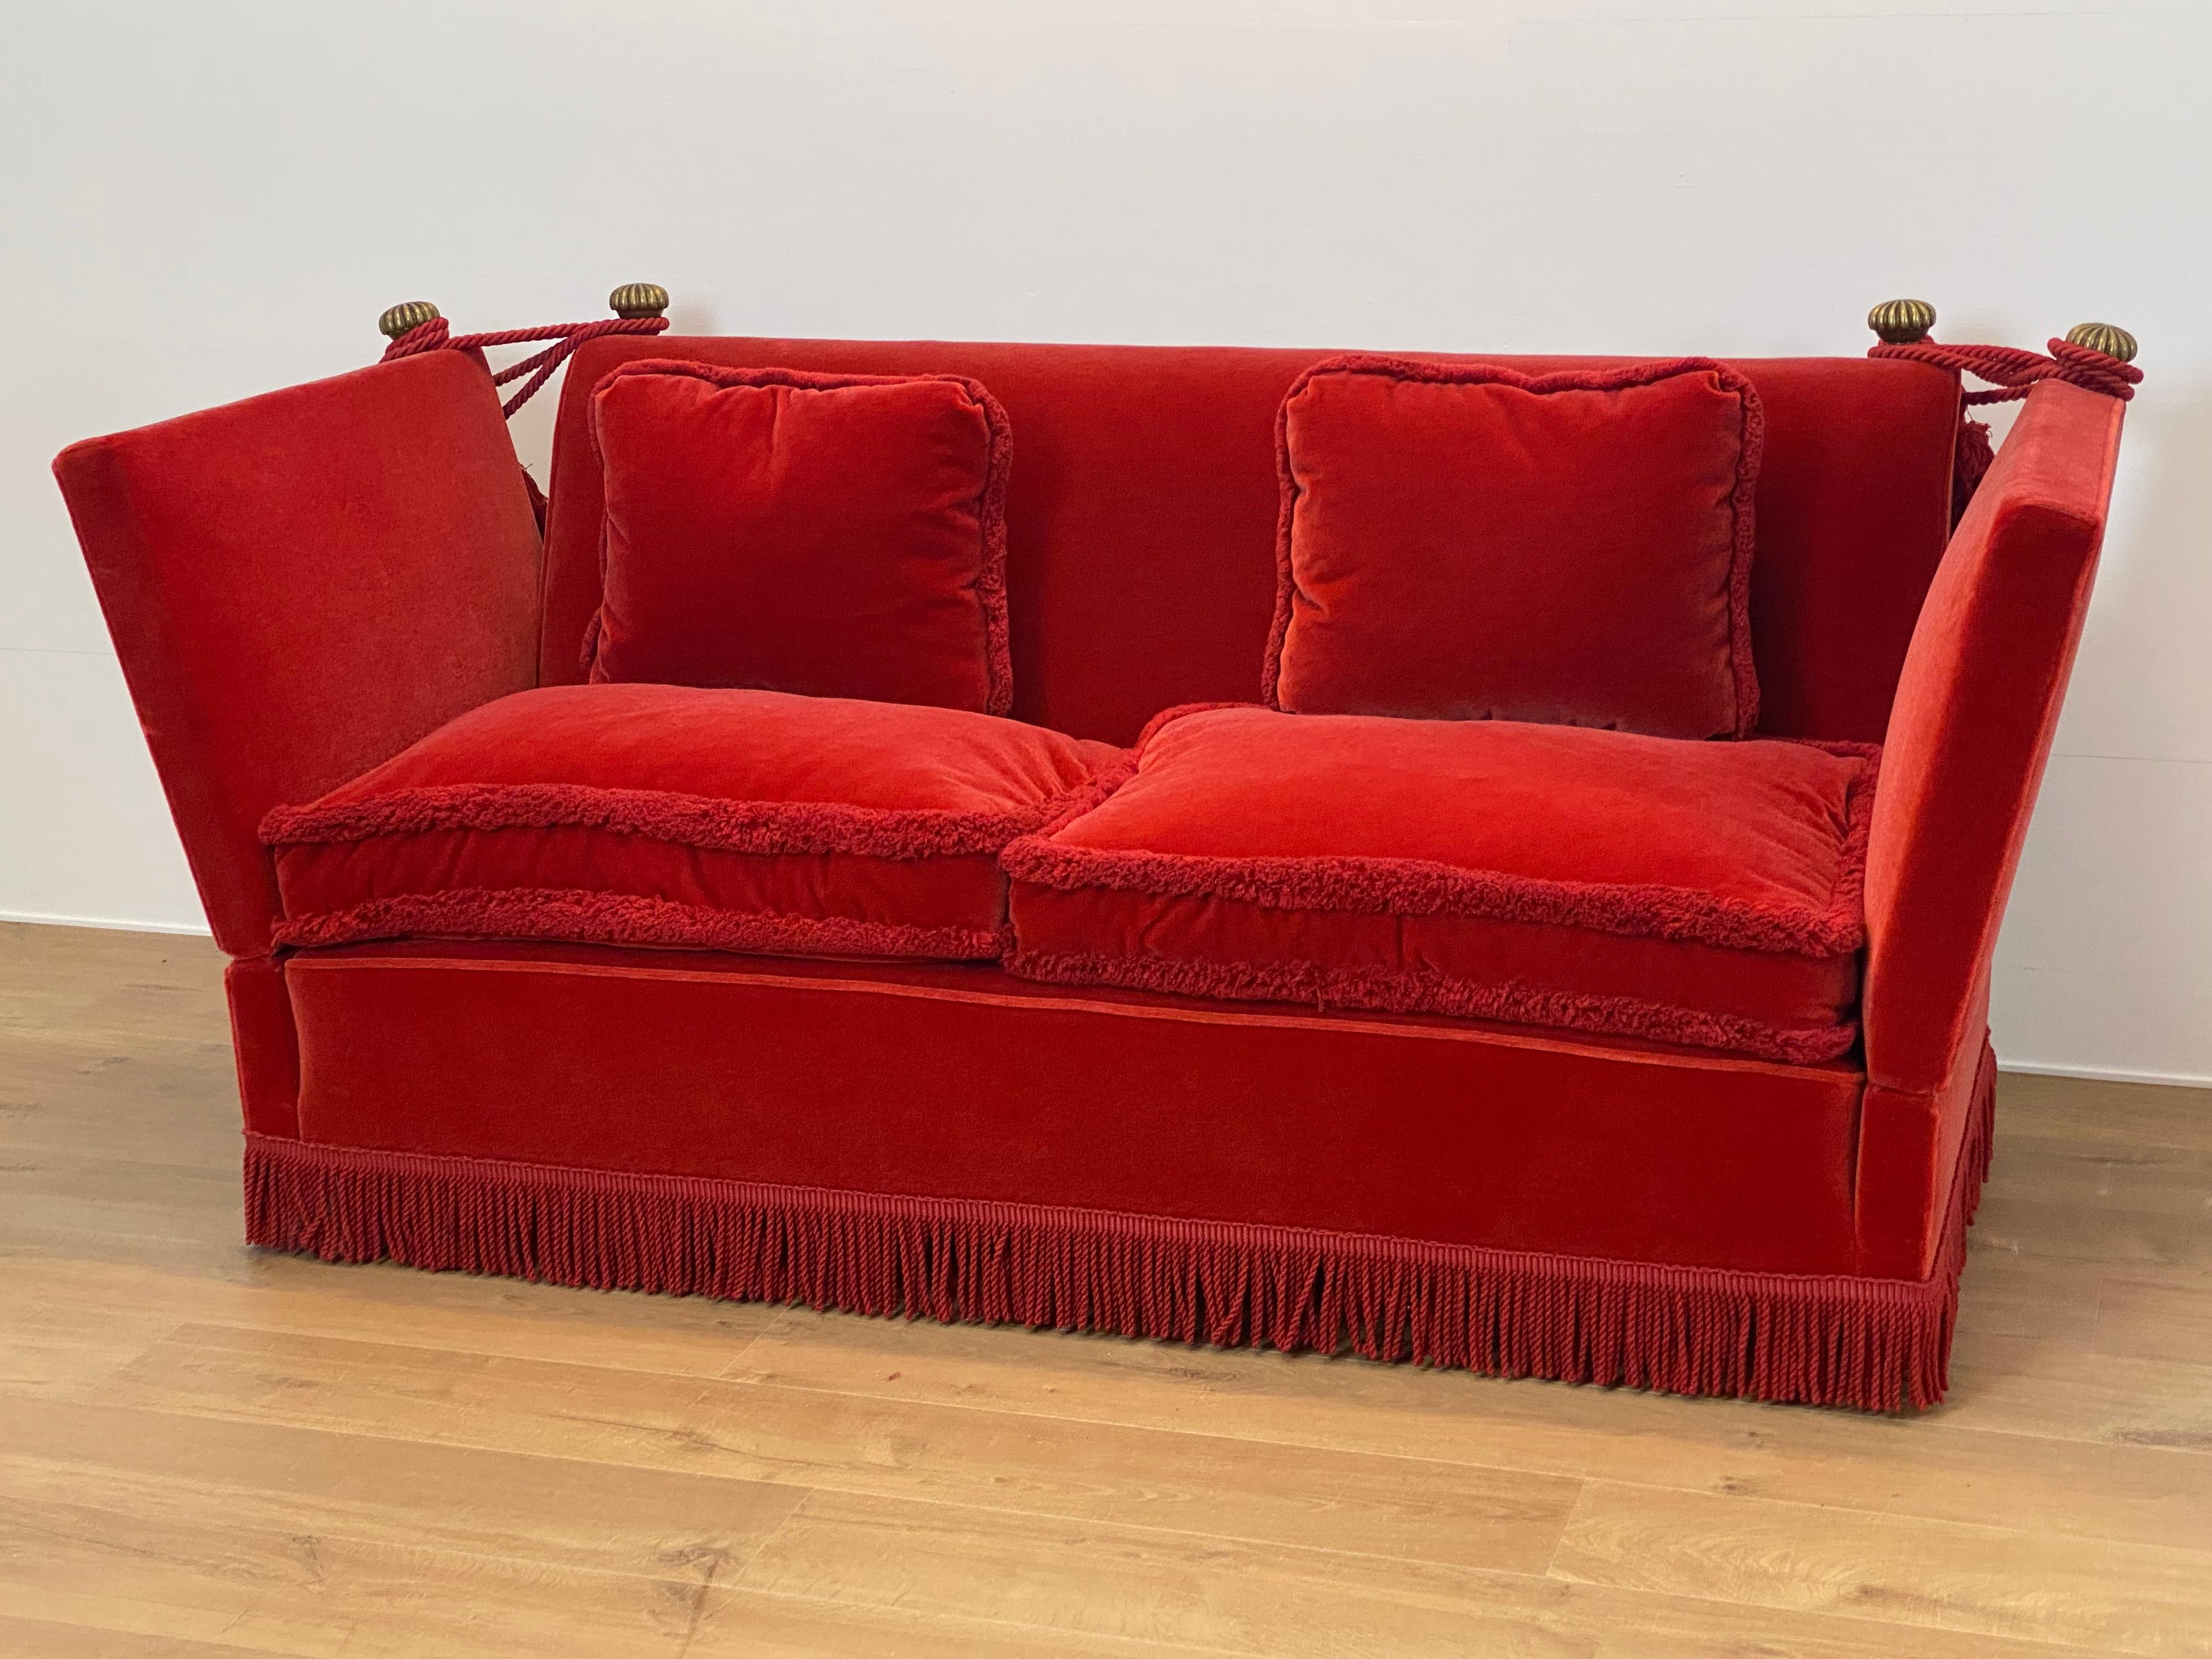 Drop Arm Knoll Style Sofa in an Orange-Red Velvet For Sale 1